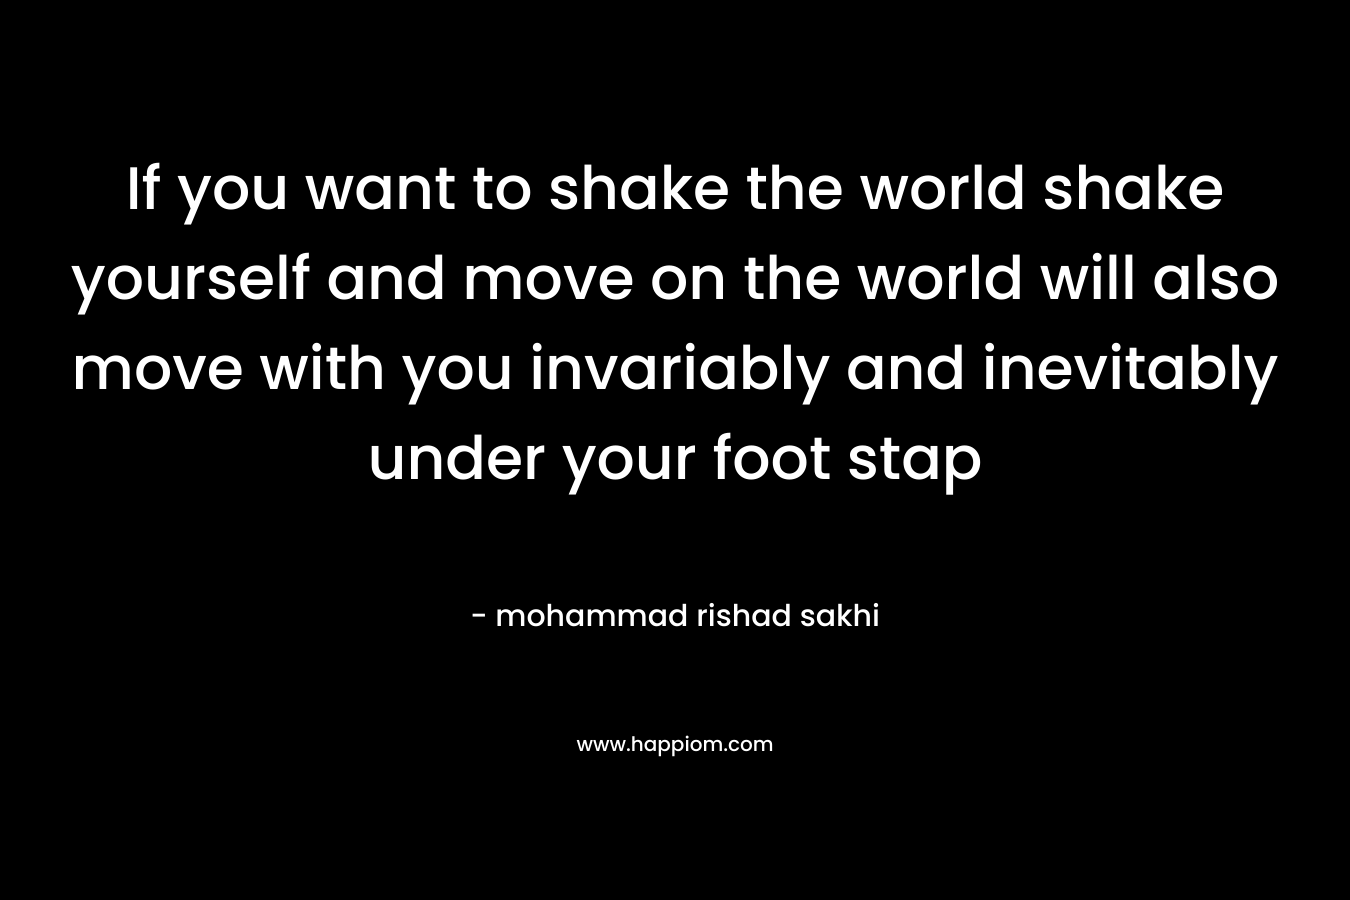 If you want to shake the world shake yourself and move on the world will also move with you invariably and inevitably under your foot stap